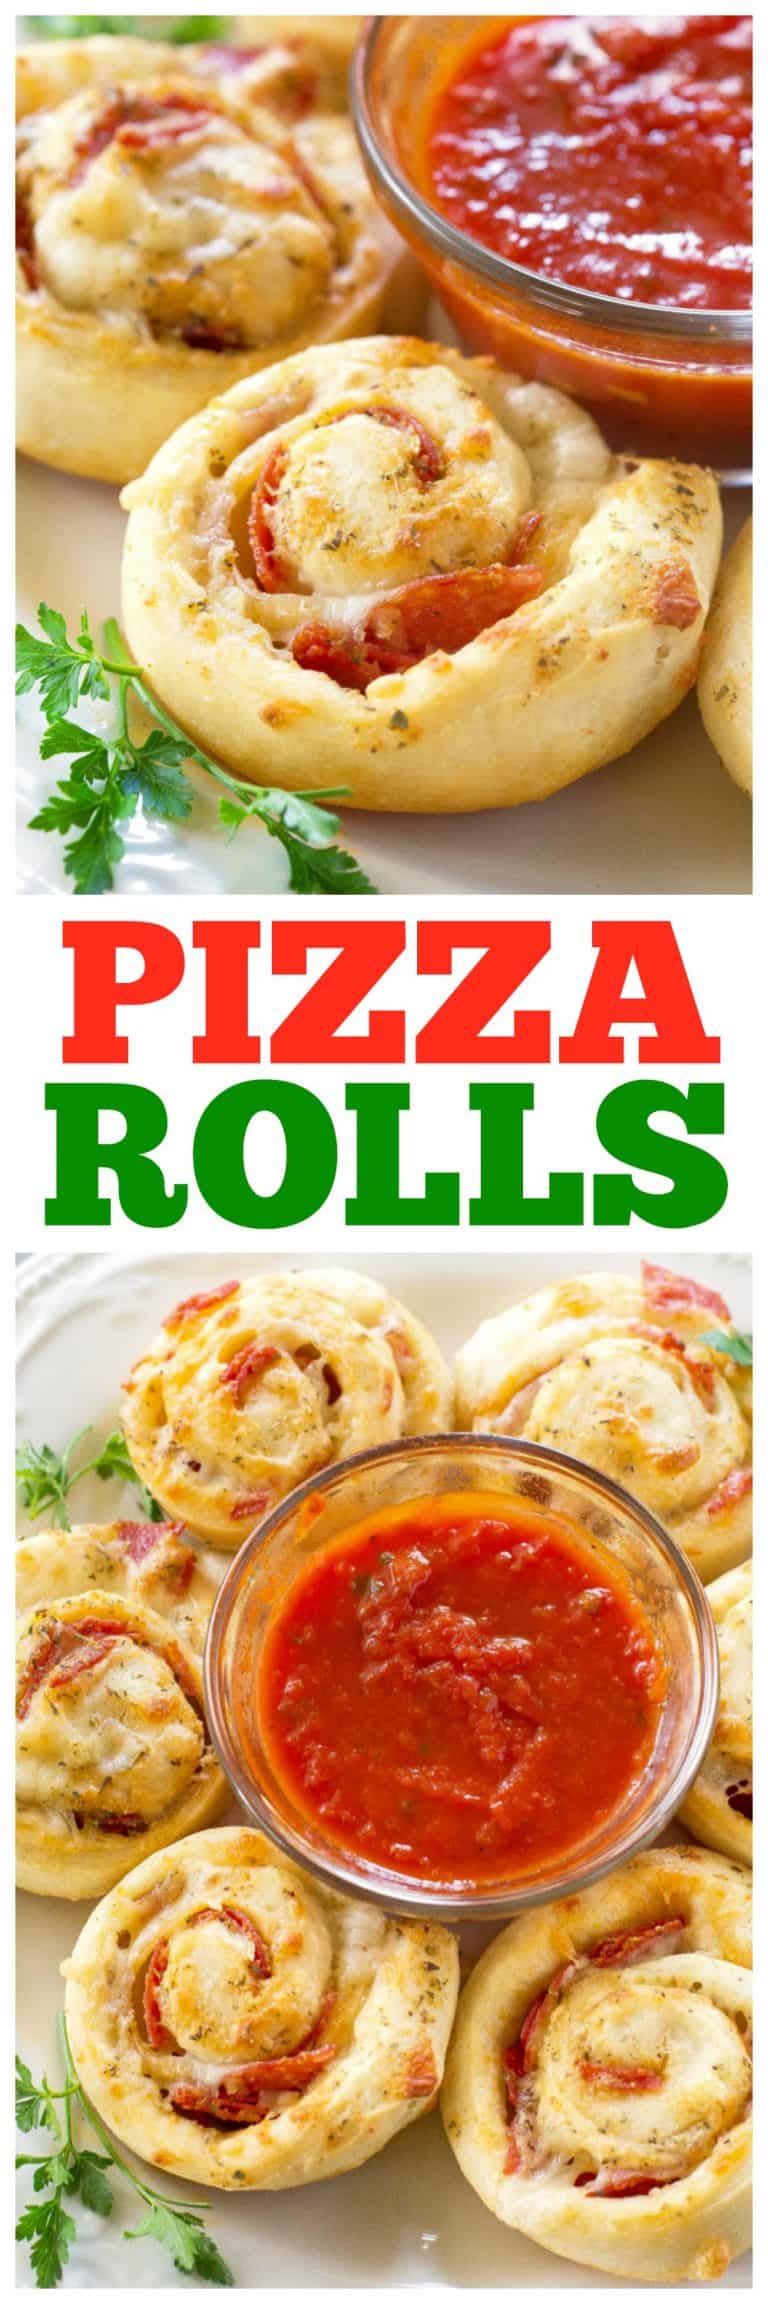 The Best Pizza Rolls Recipe (+VIDEO) - The Girl Who Ate Everything